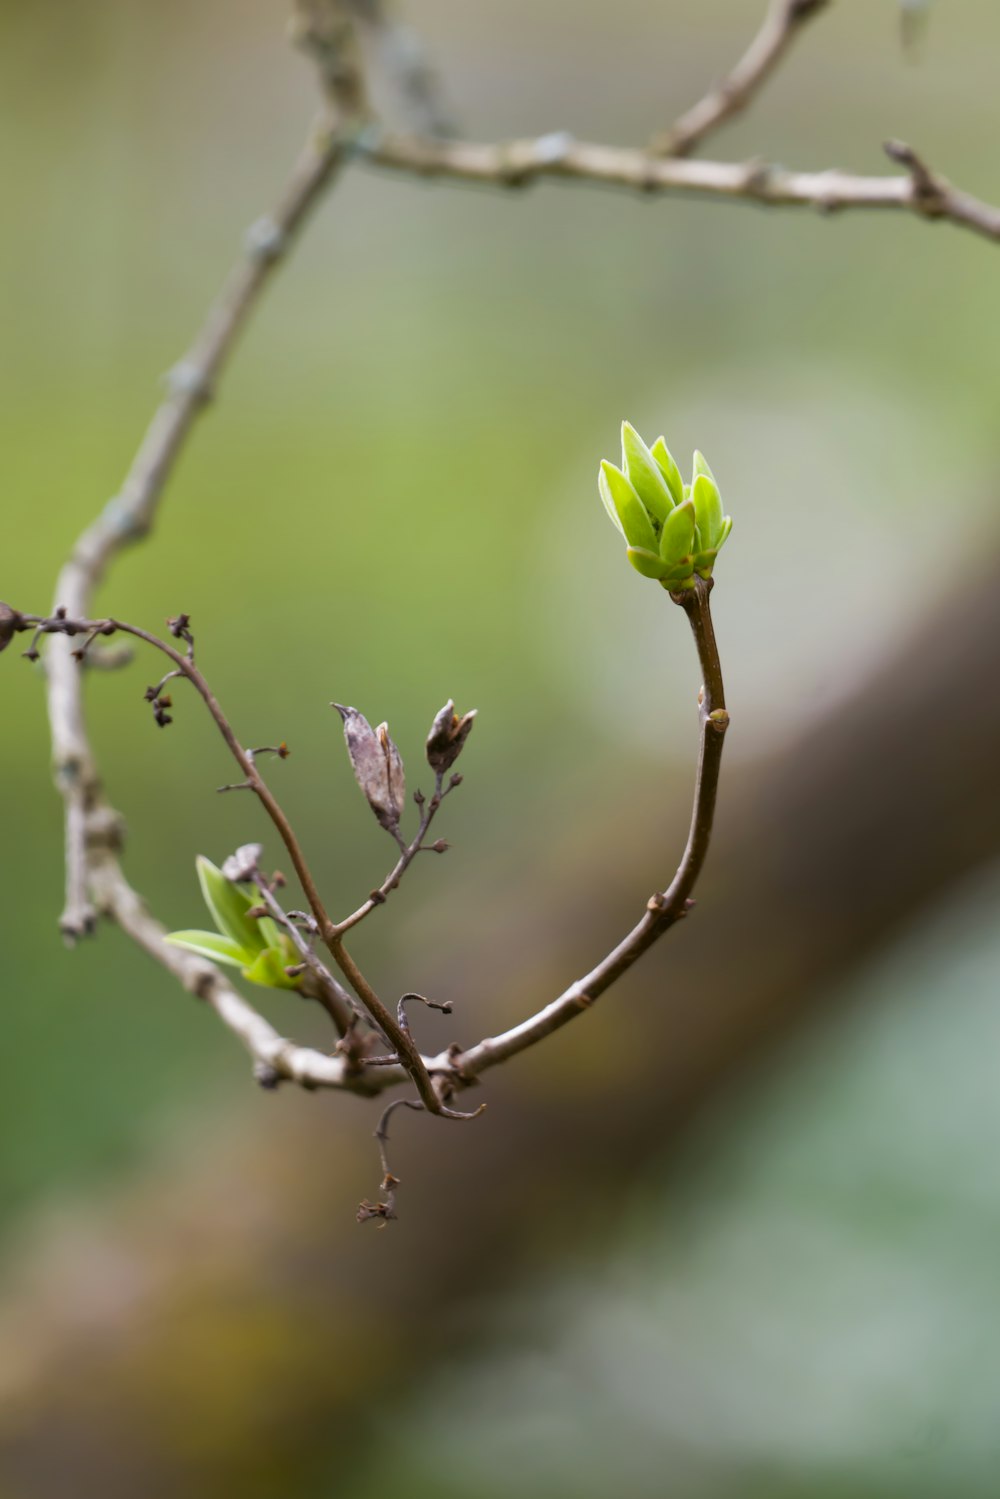 a tree branch with a small green flower